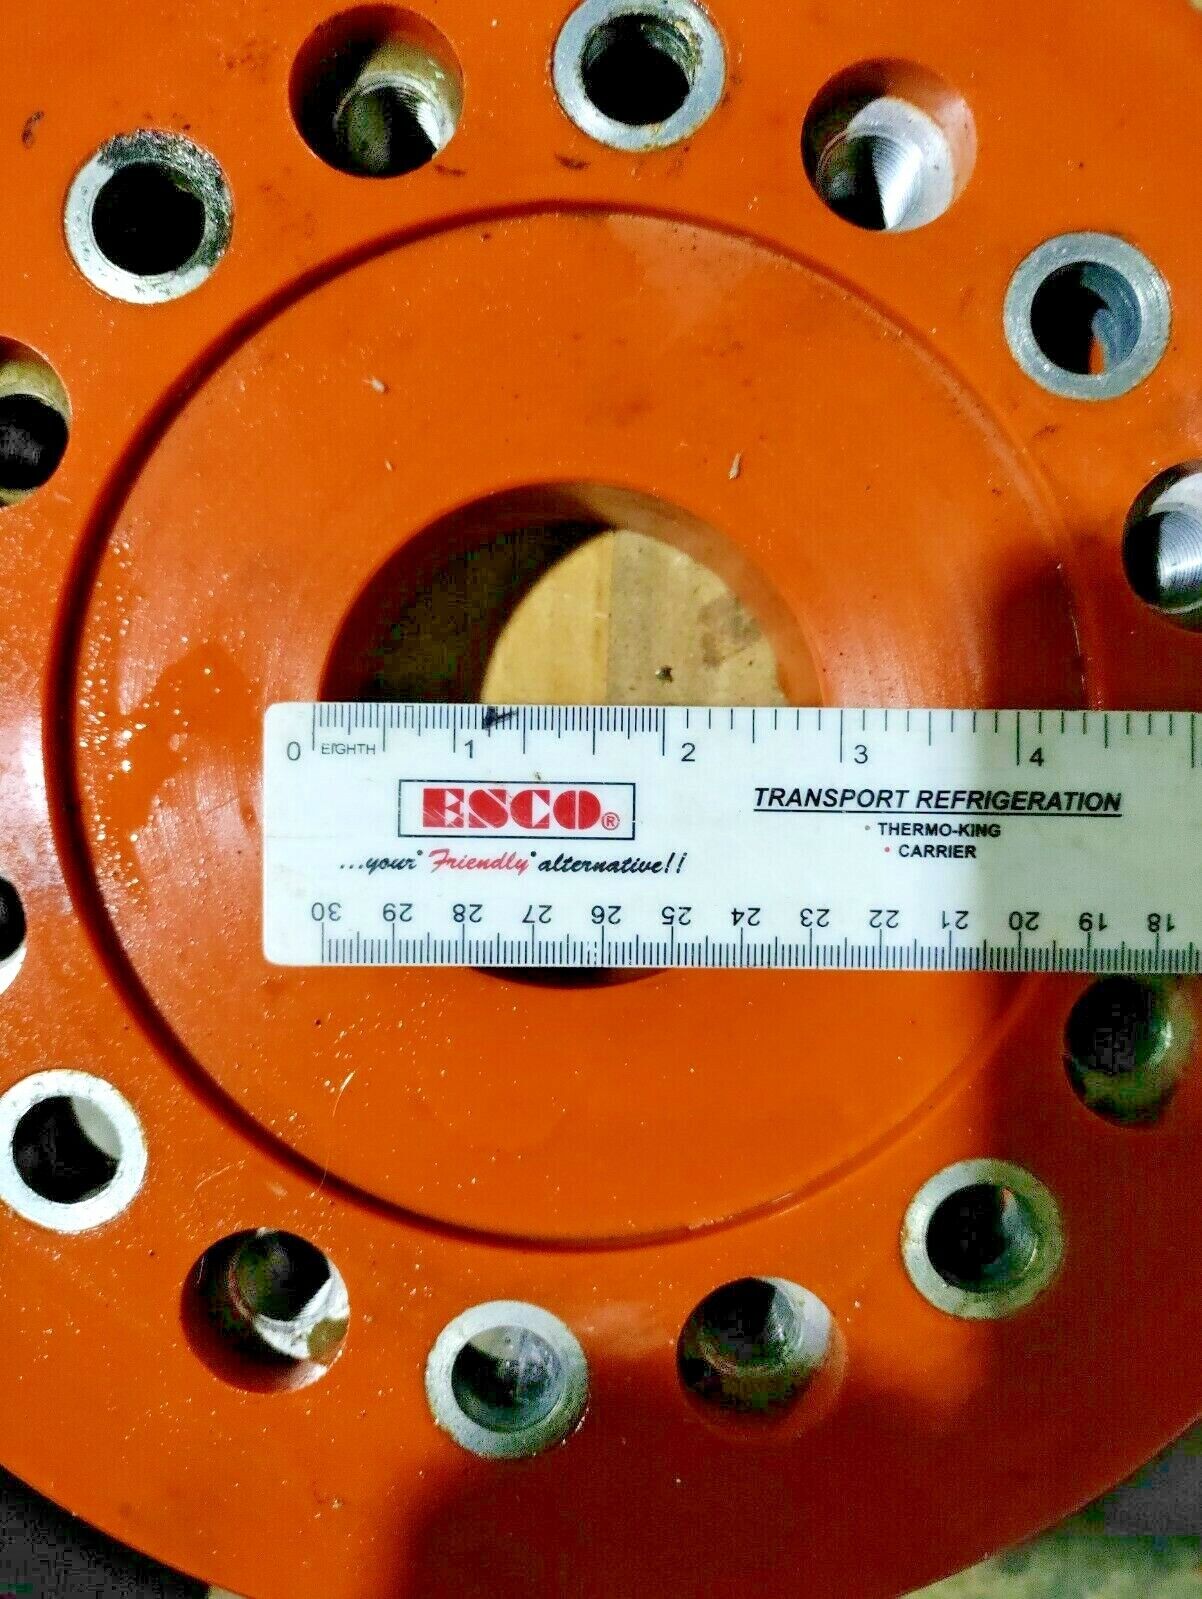 2 DRIVESAVERS  11 INCH DIA.  USED IN GOOD CONDITION ( SEE DESCRIPTION )